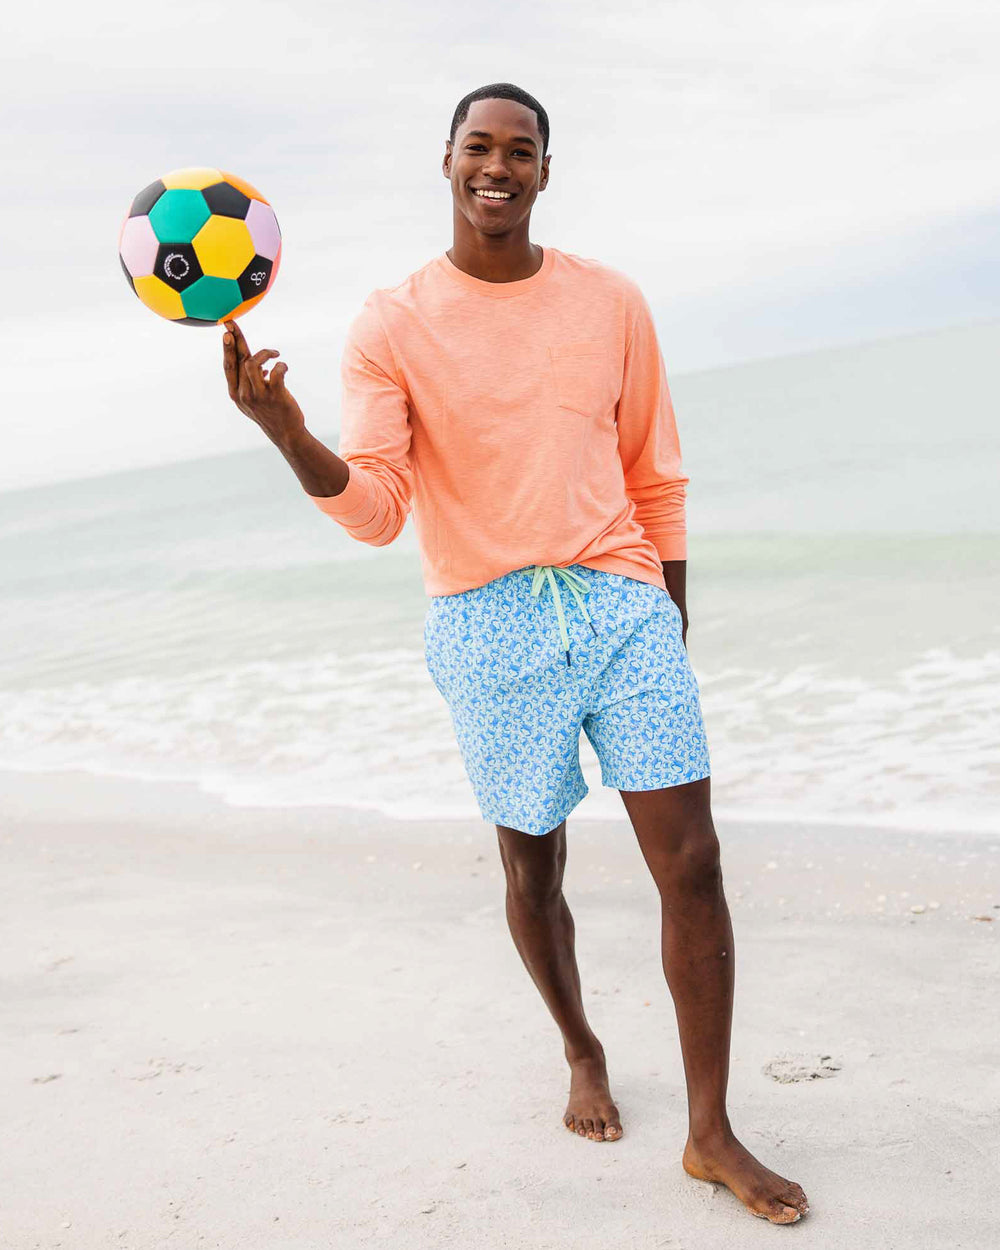 The model lifestyle view of the Men's Sun Farer Long Sleeve T-Shirt by Southern Tide - Sunbaked Sand